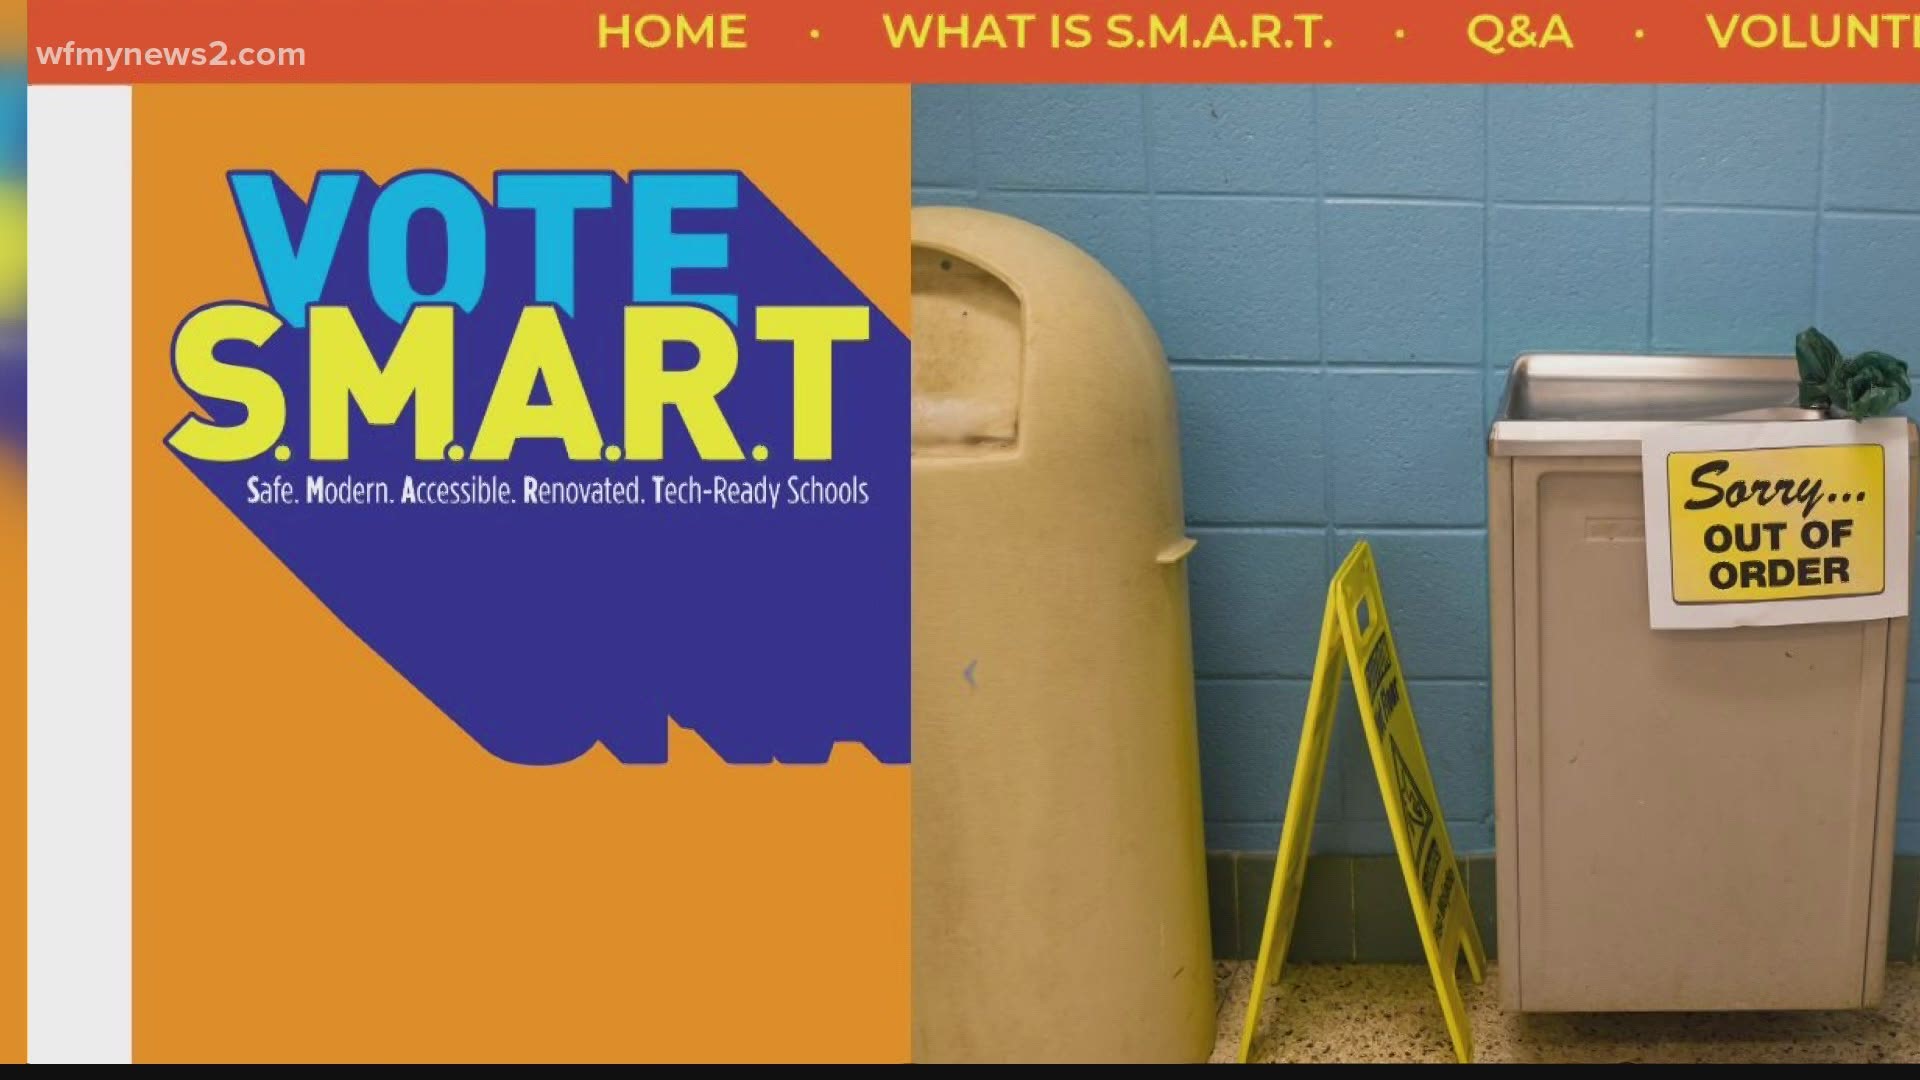 Vote Smart is a group supporting the bond. They’re hoping to raise awareness before election day.